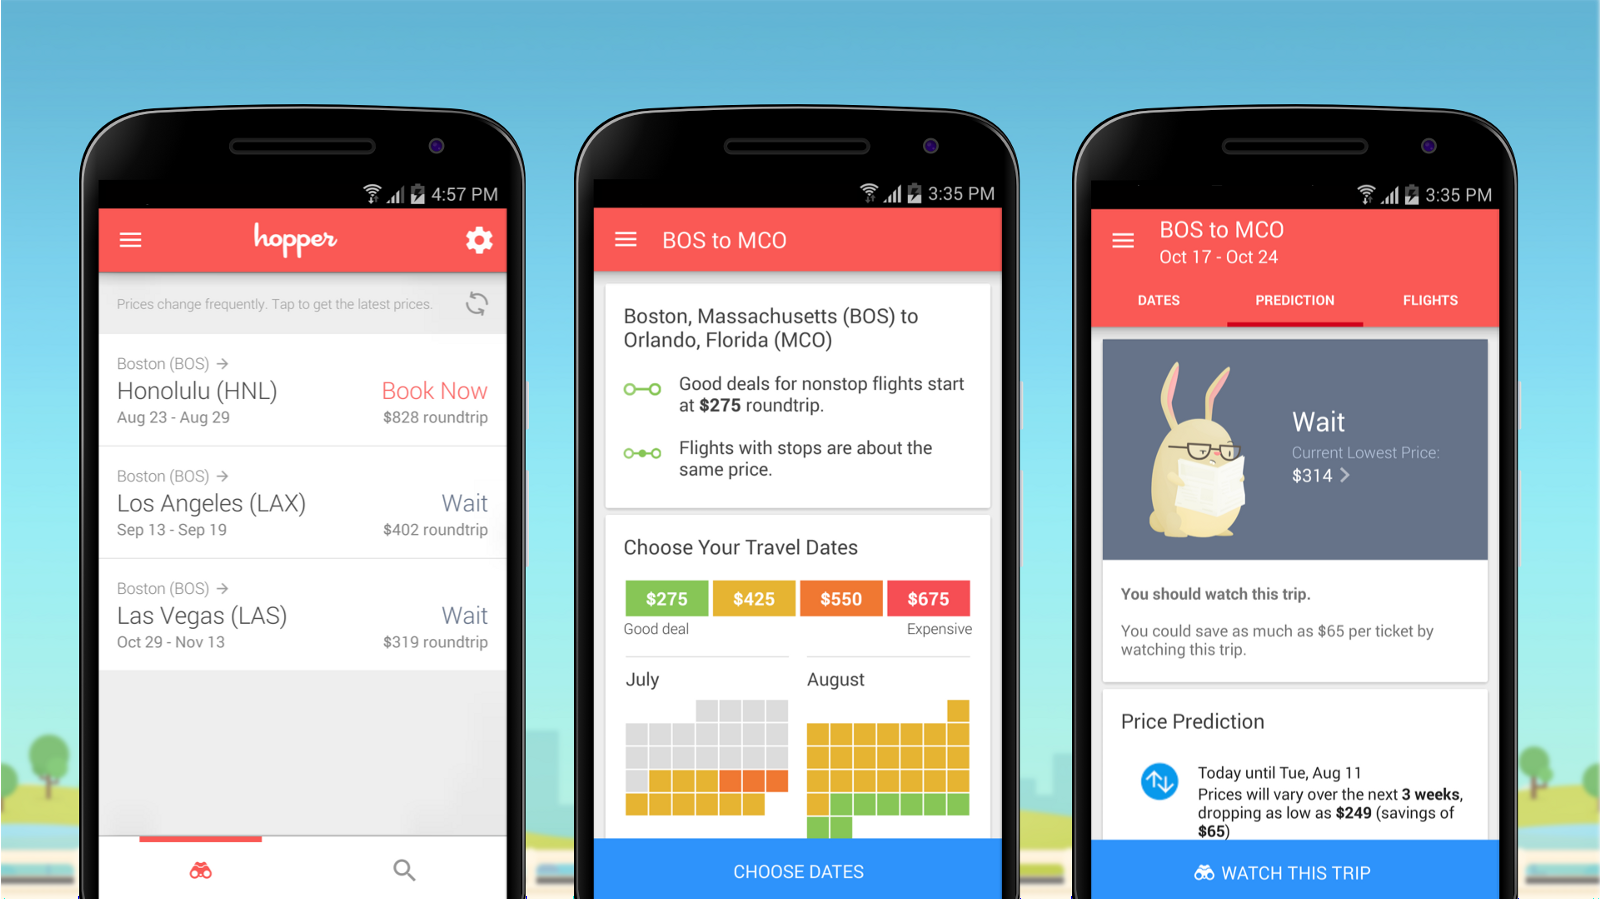 Apps save. Date choose. Get latest Price. Apps and money. Today prediction